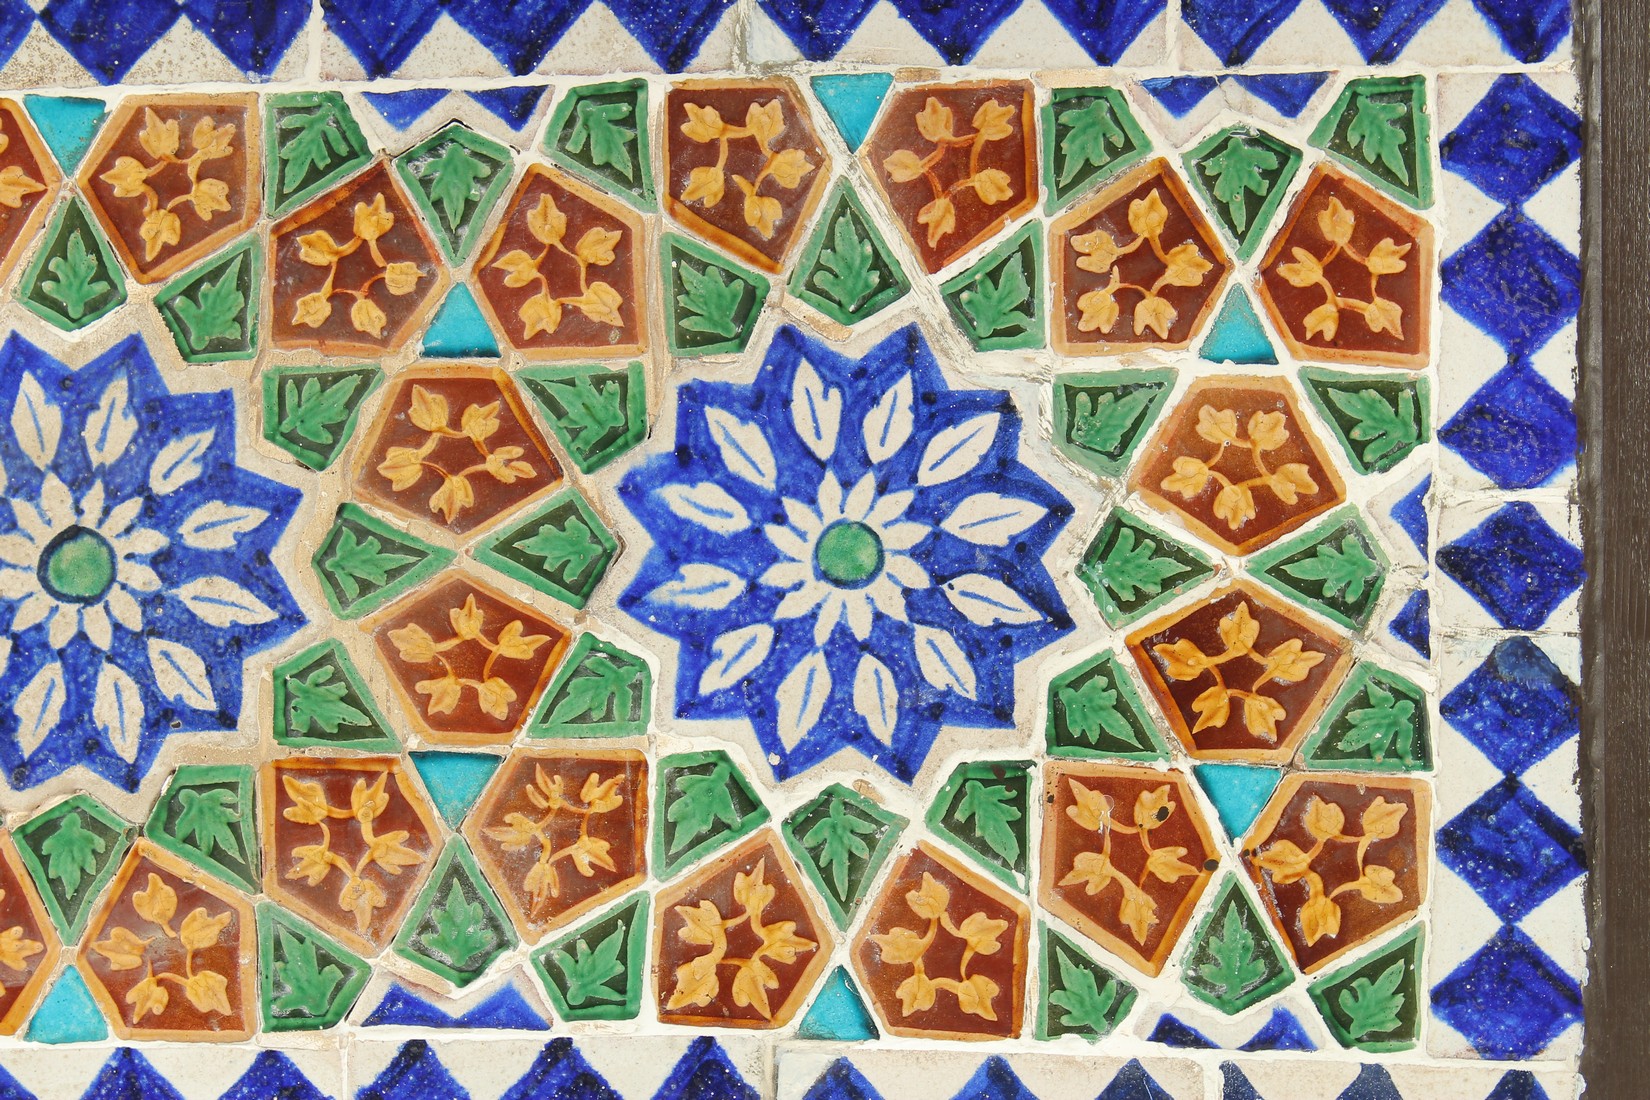 A FINE LARGE 19TH CENTURY INDIAN GLAZED POTTERY TILED PANEL, inset within a wooden frame; possibly a - Image 3 of 4